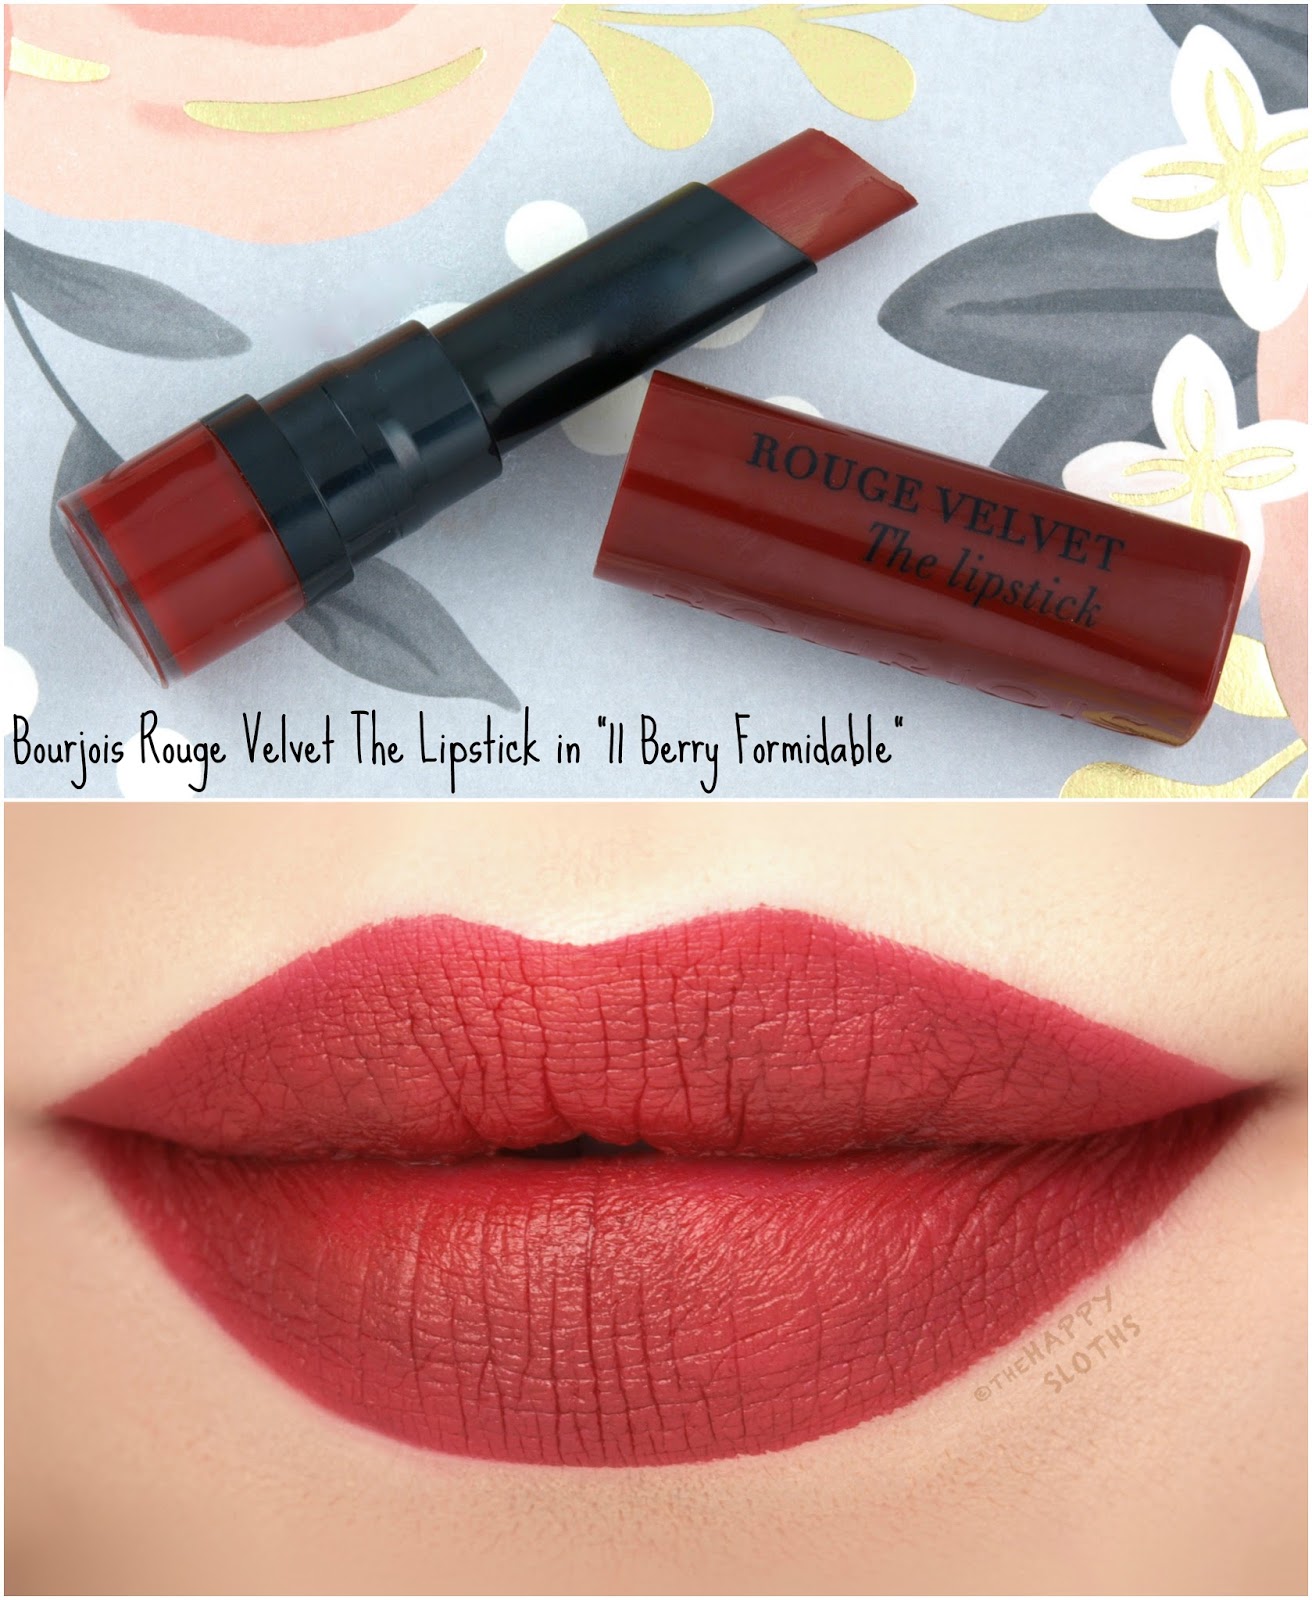 Bourjois | Rouge Velvet The Lipstick in "11 Berry Formidable": Review and Swatches